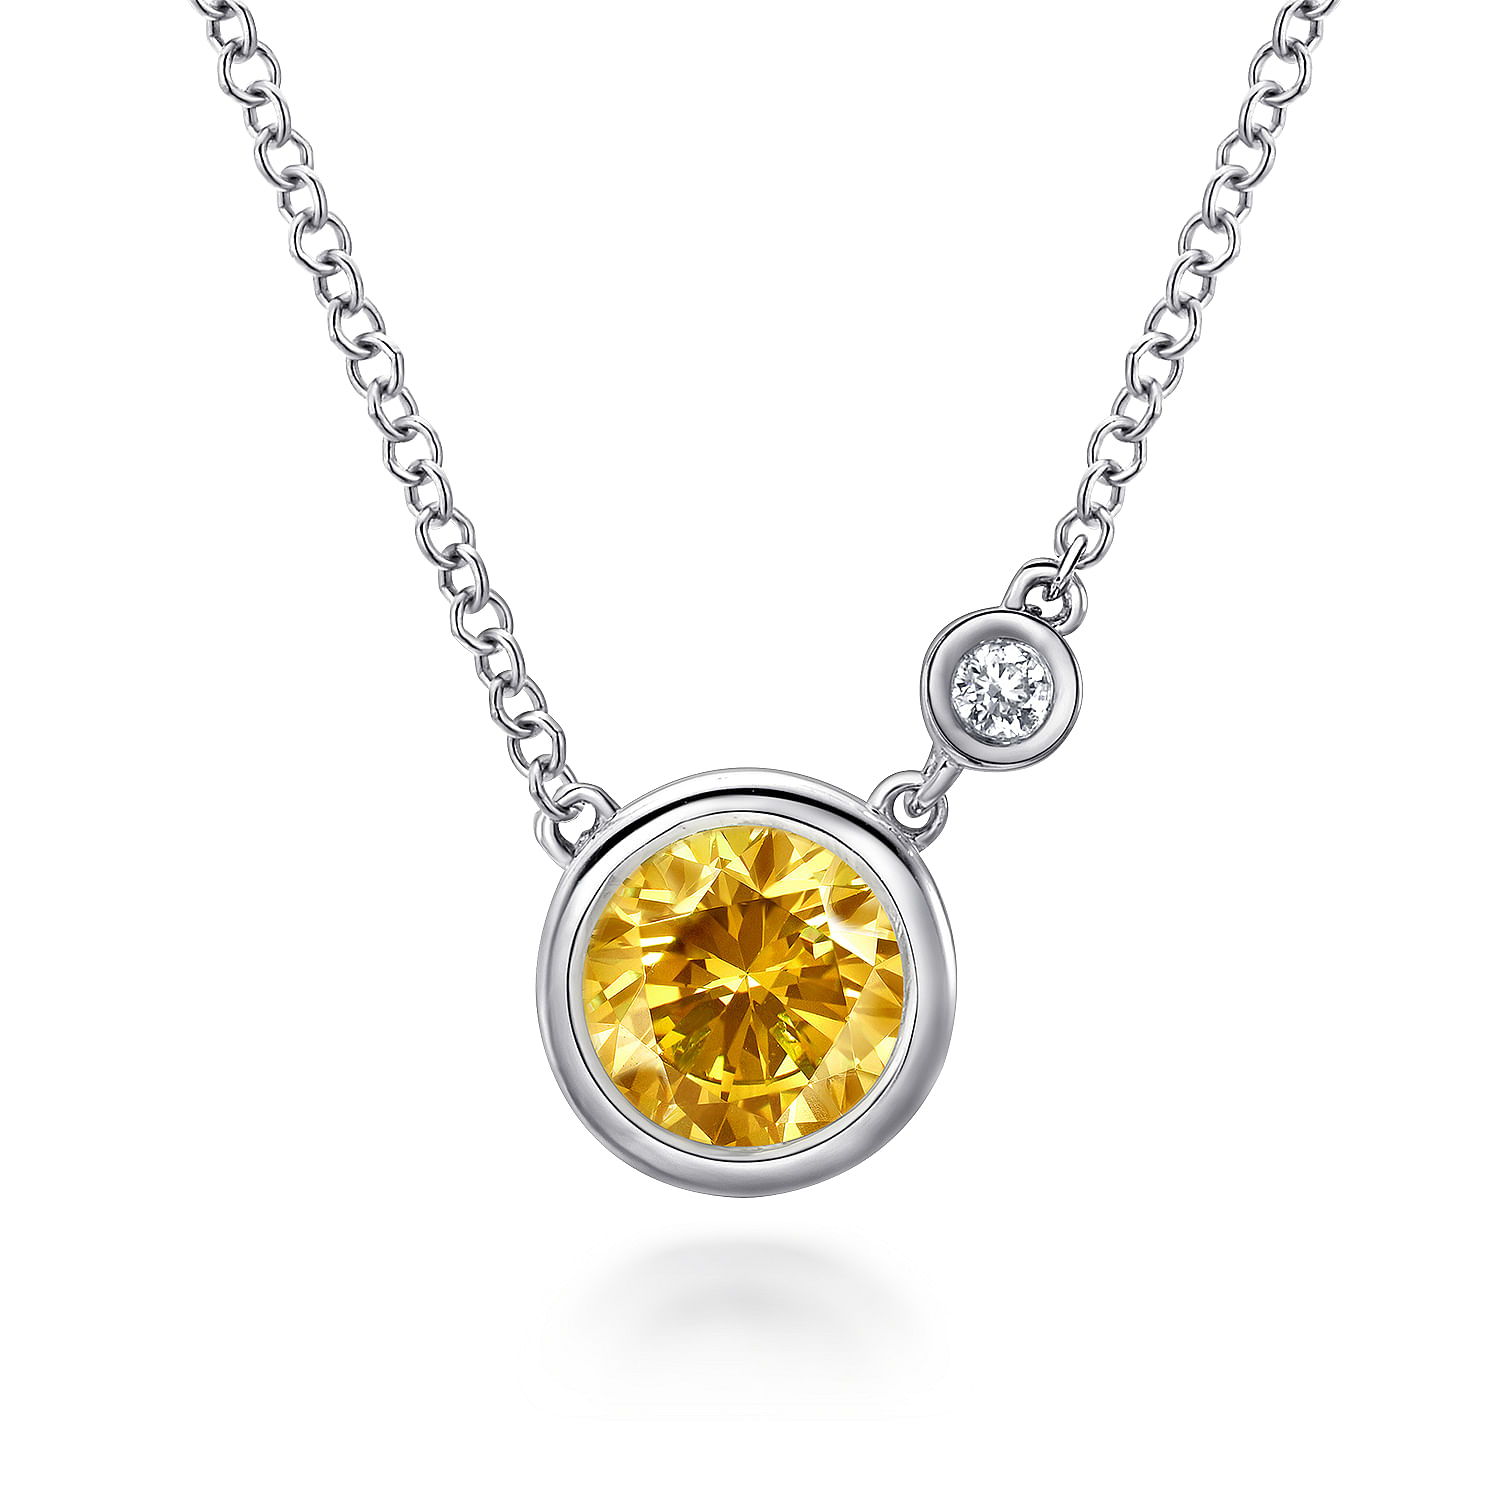 Gabriel - 925 Sterling Silver Citrine and Diamond Pendant Necklace 